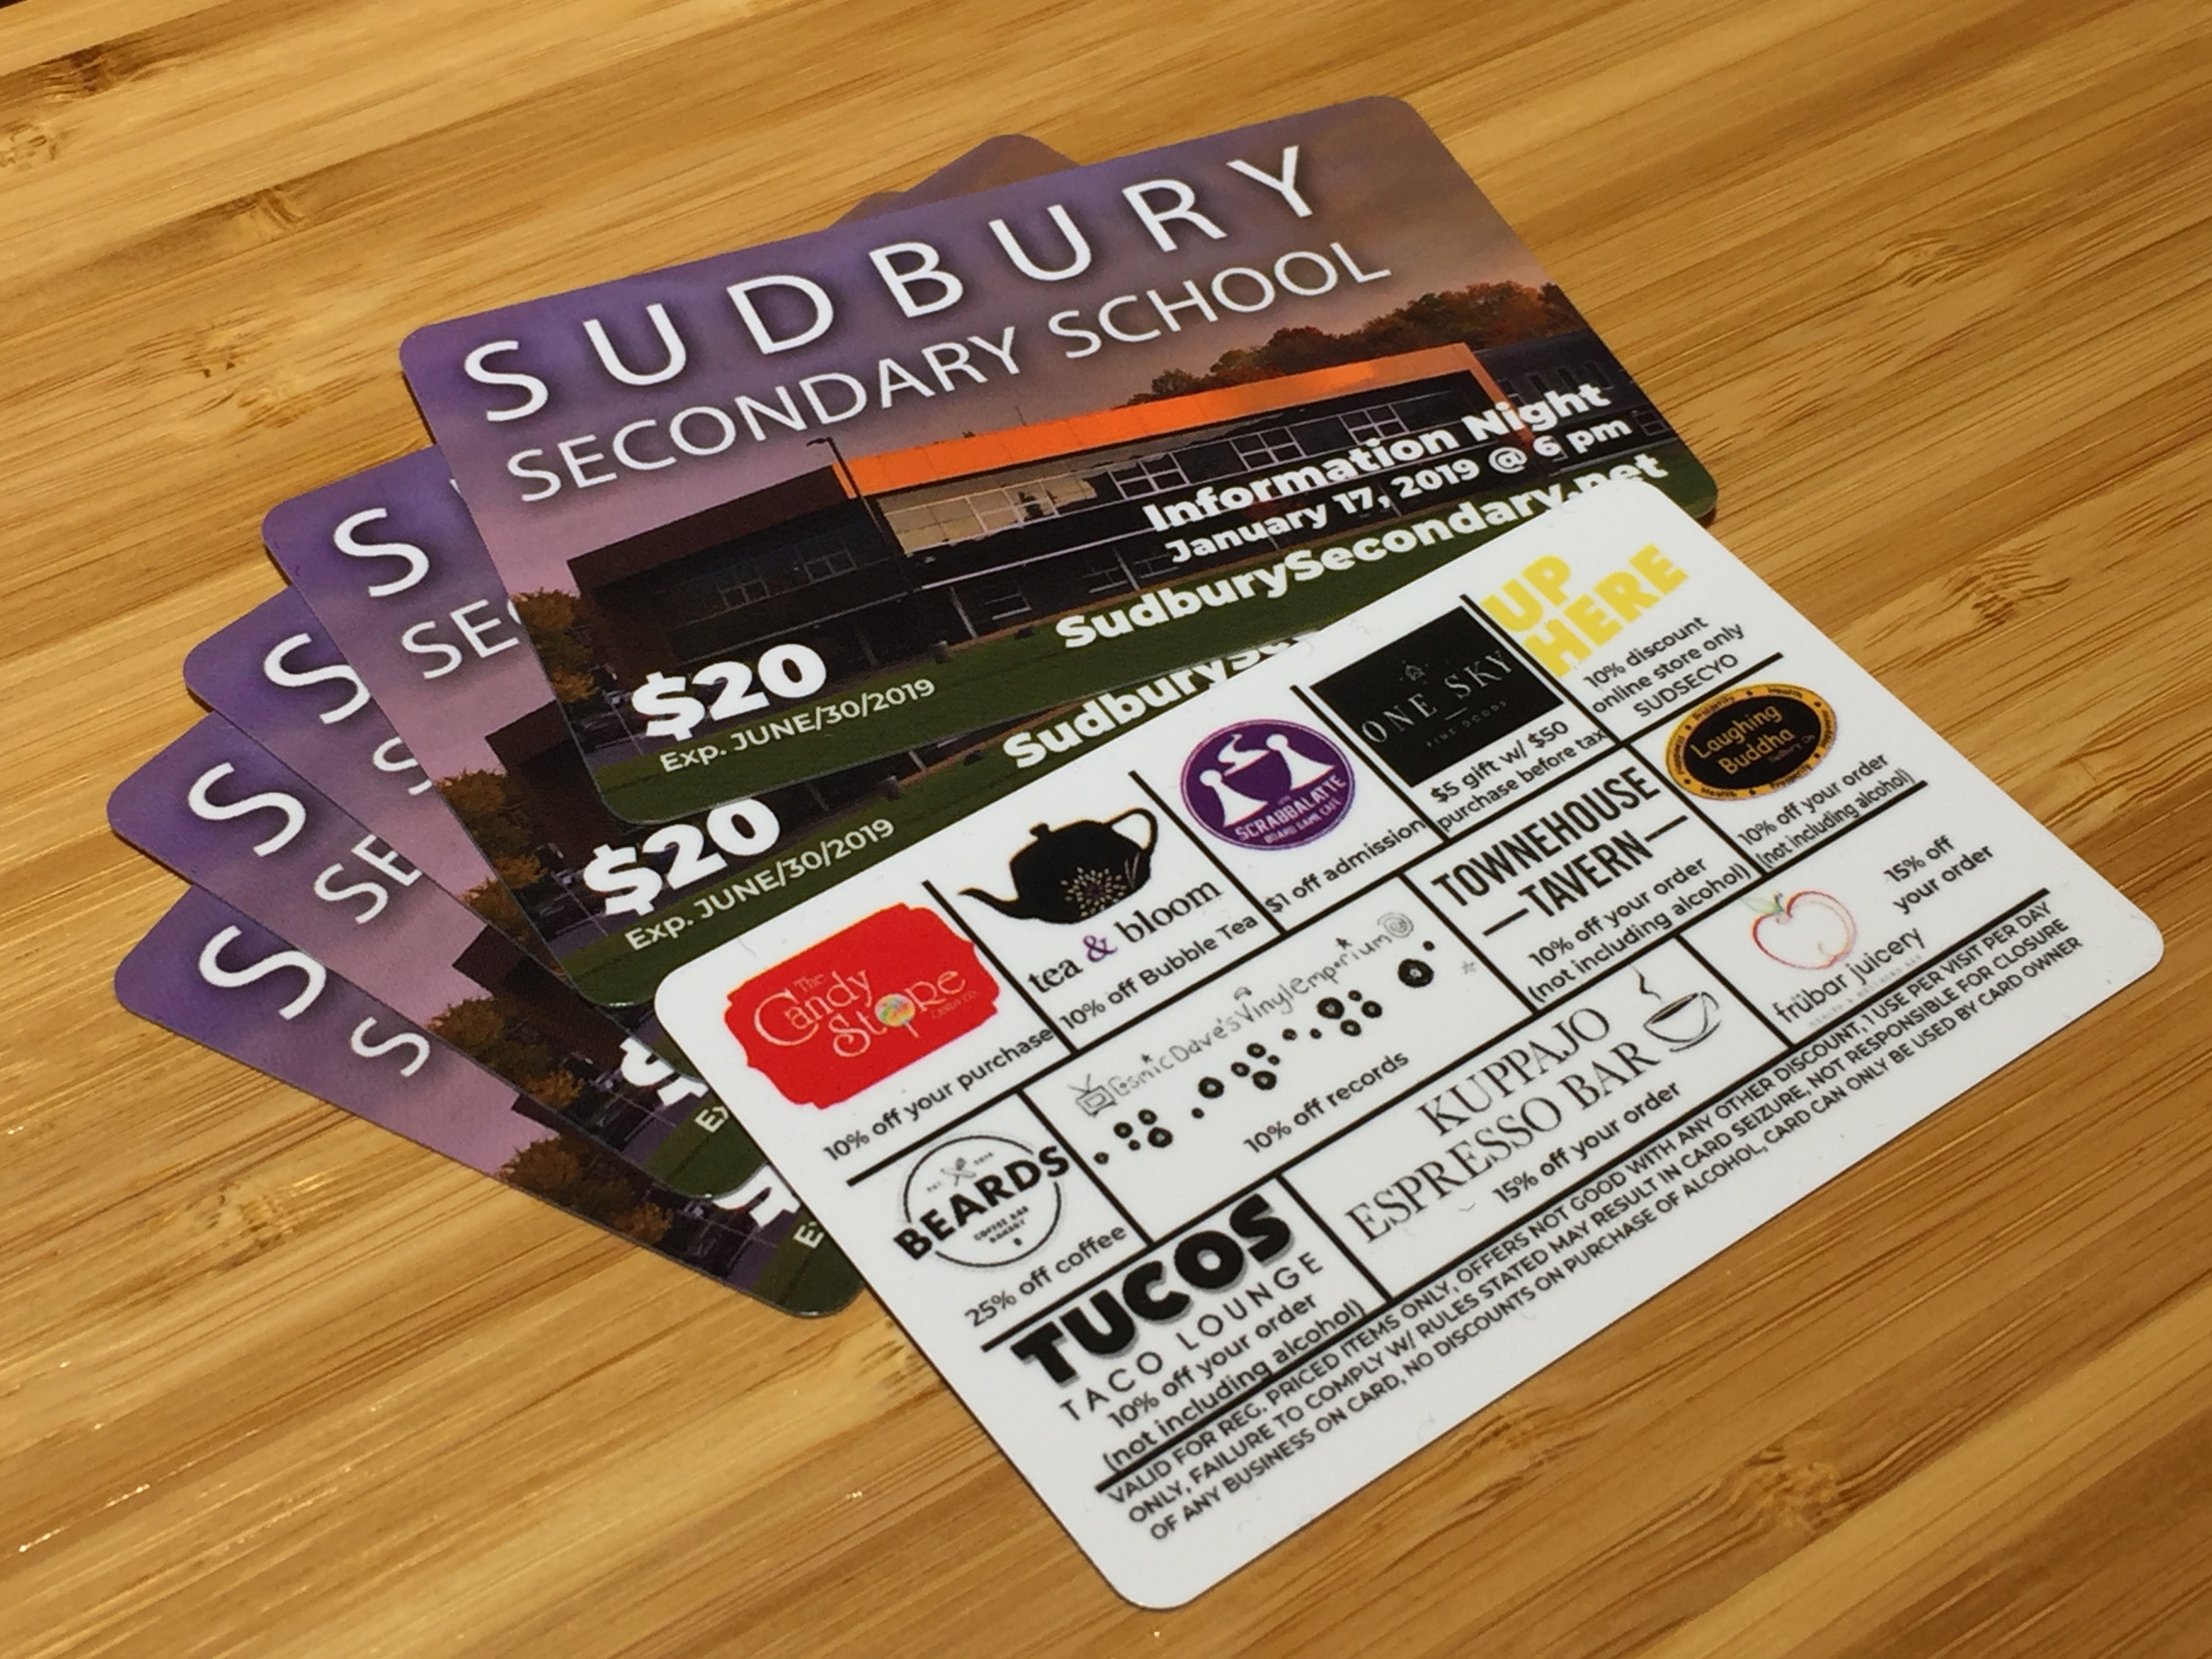 Support Sudbury Secondary School and receive great discounts!